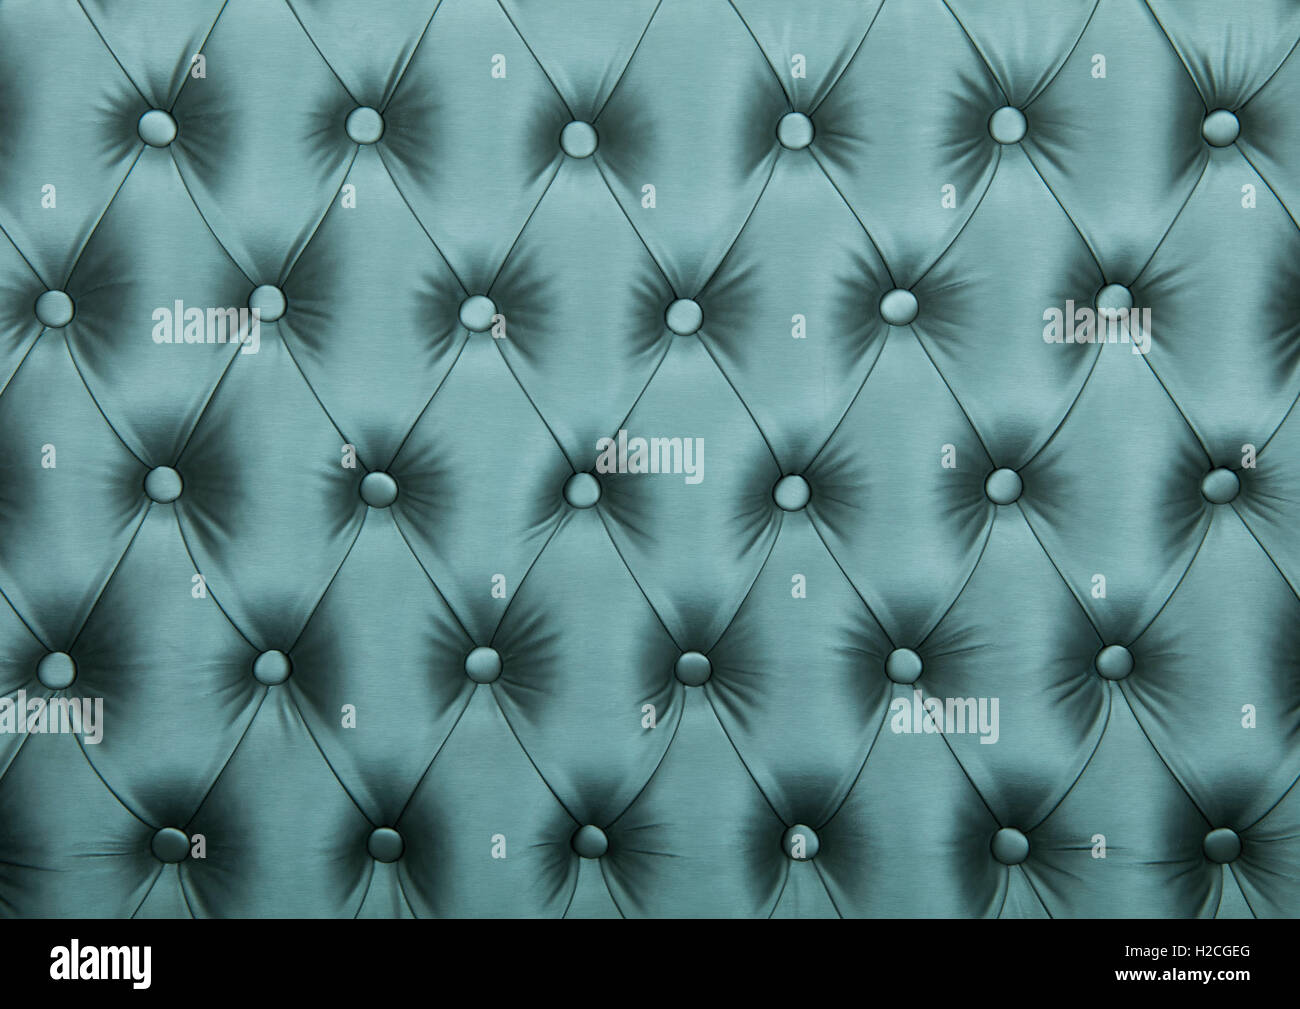 Silver blue teal capitone textile background, retro Chesterfield style checkered soft tufted fabric furniture diamond pattern de Stock Photo